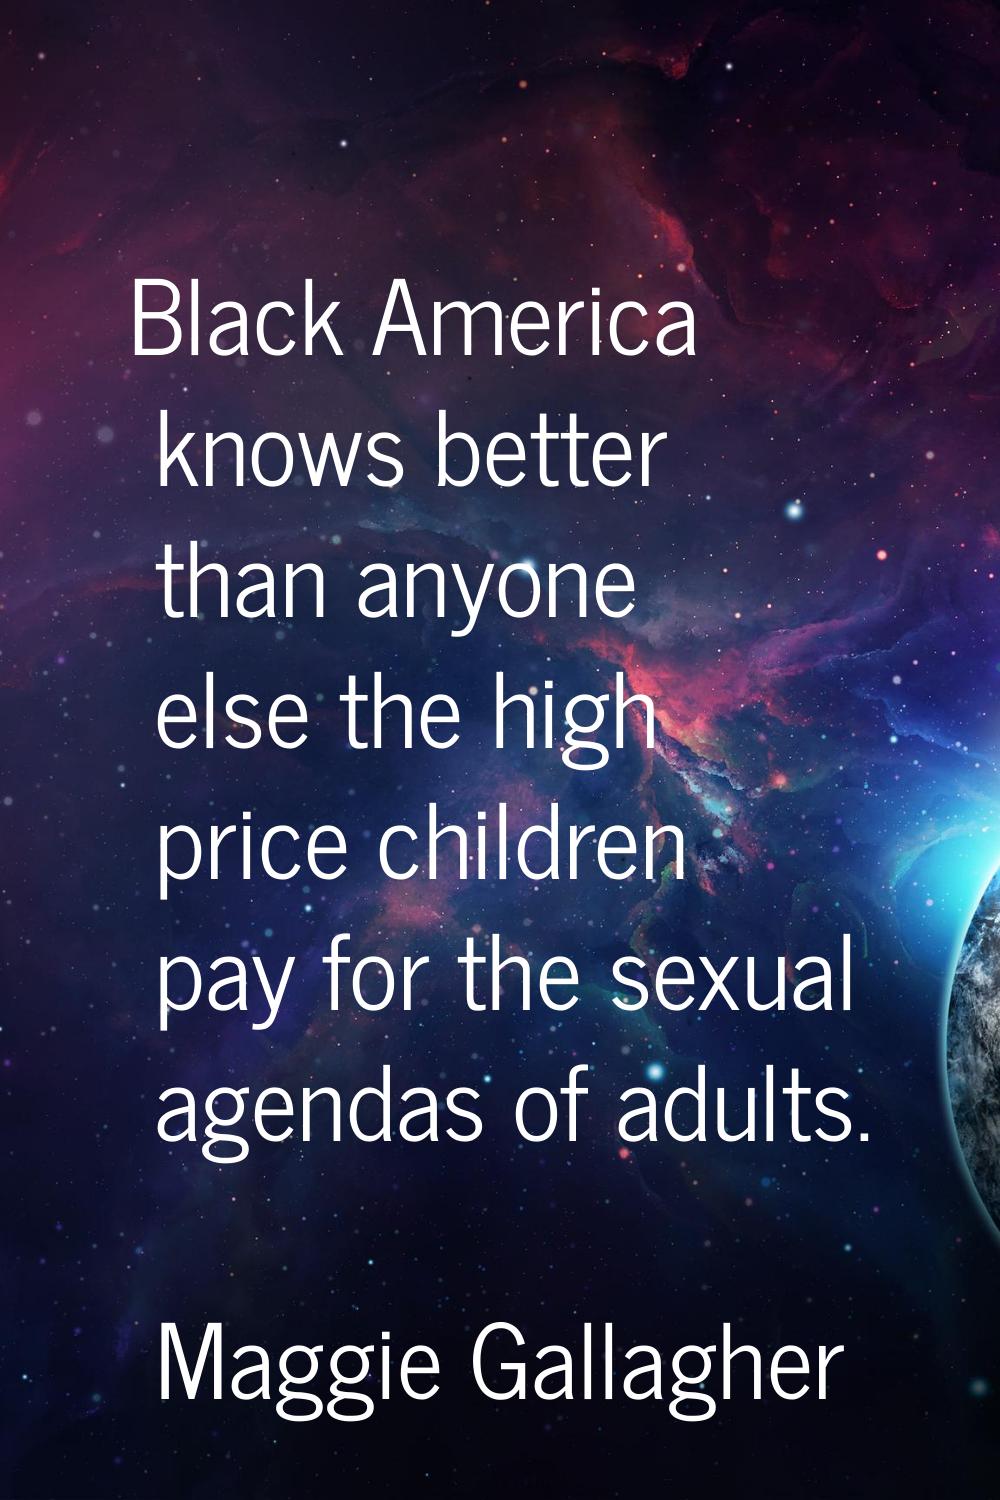 Black America knows better than anyone else the high price children pay for the sexual agendas of a